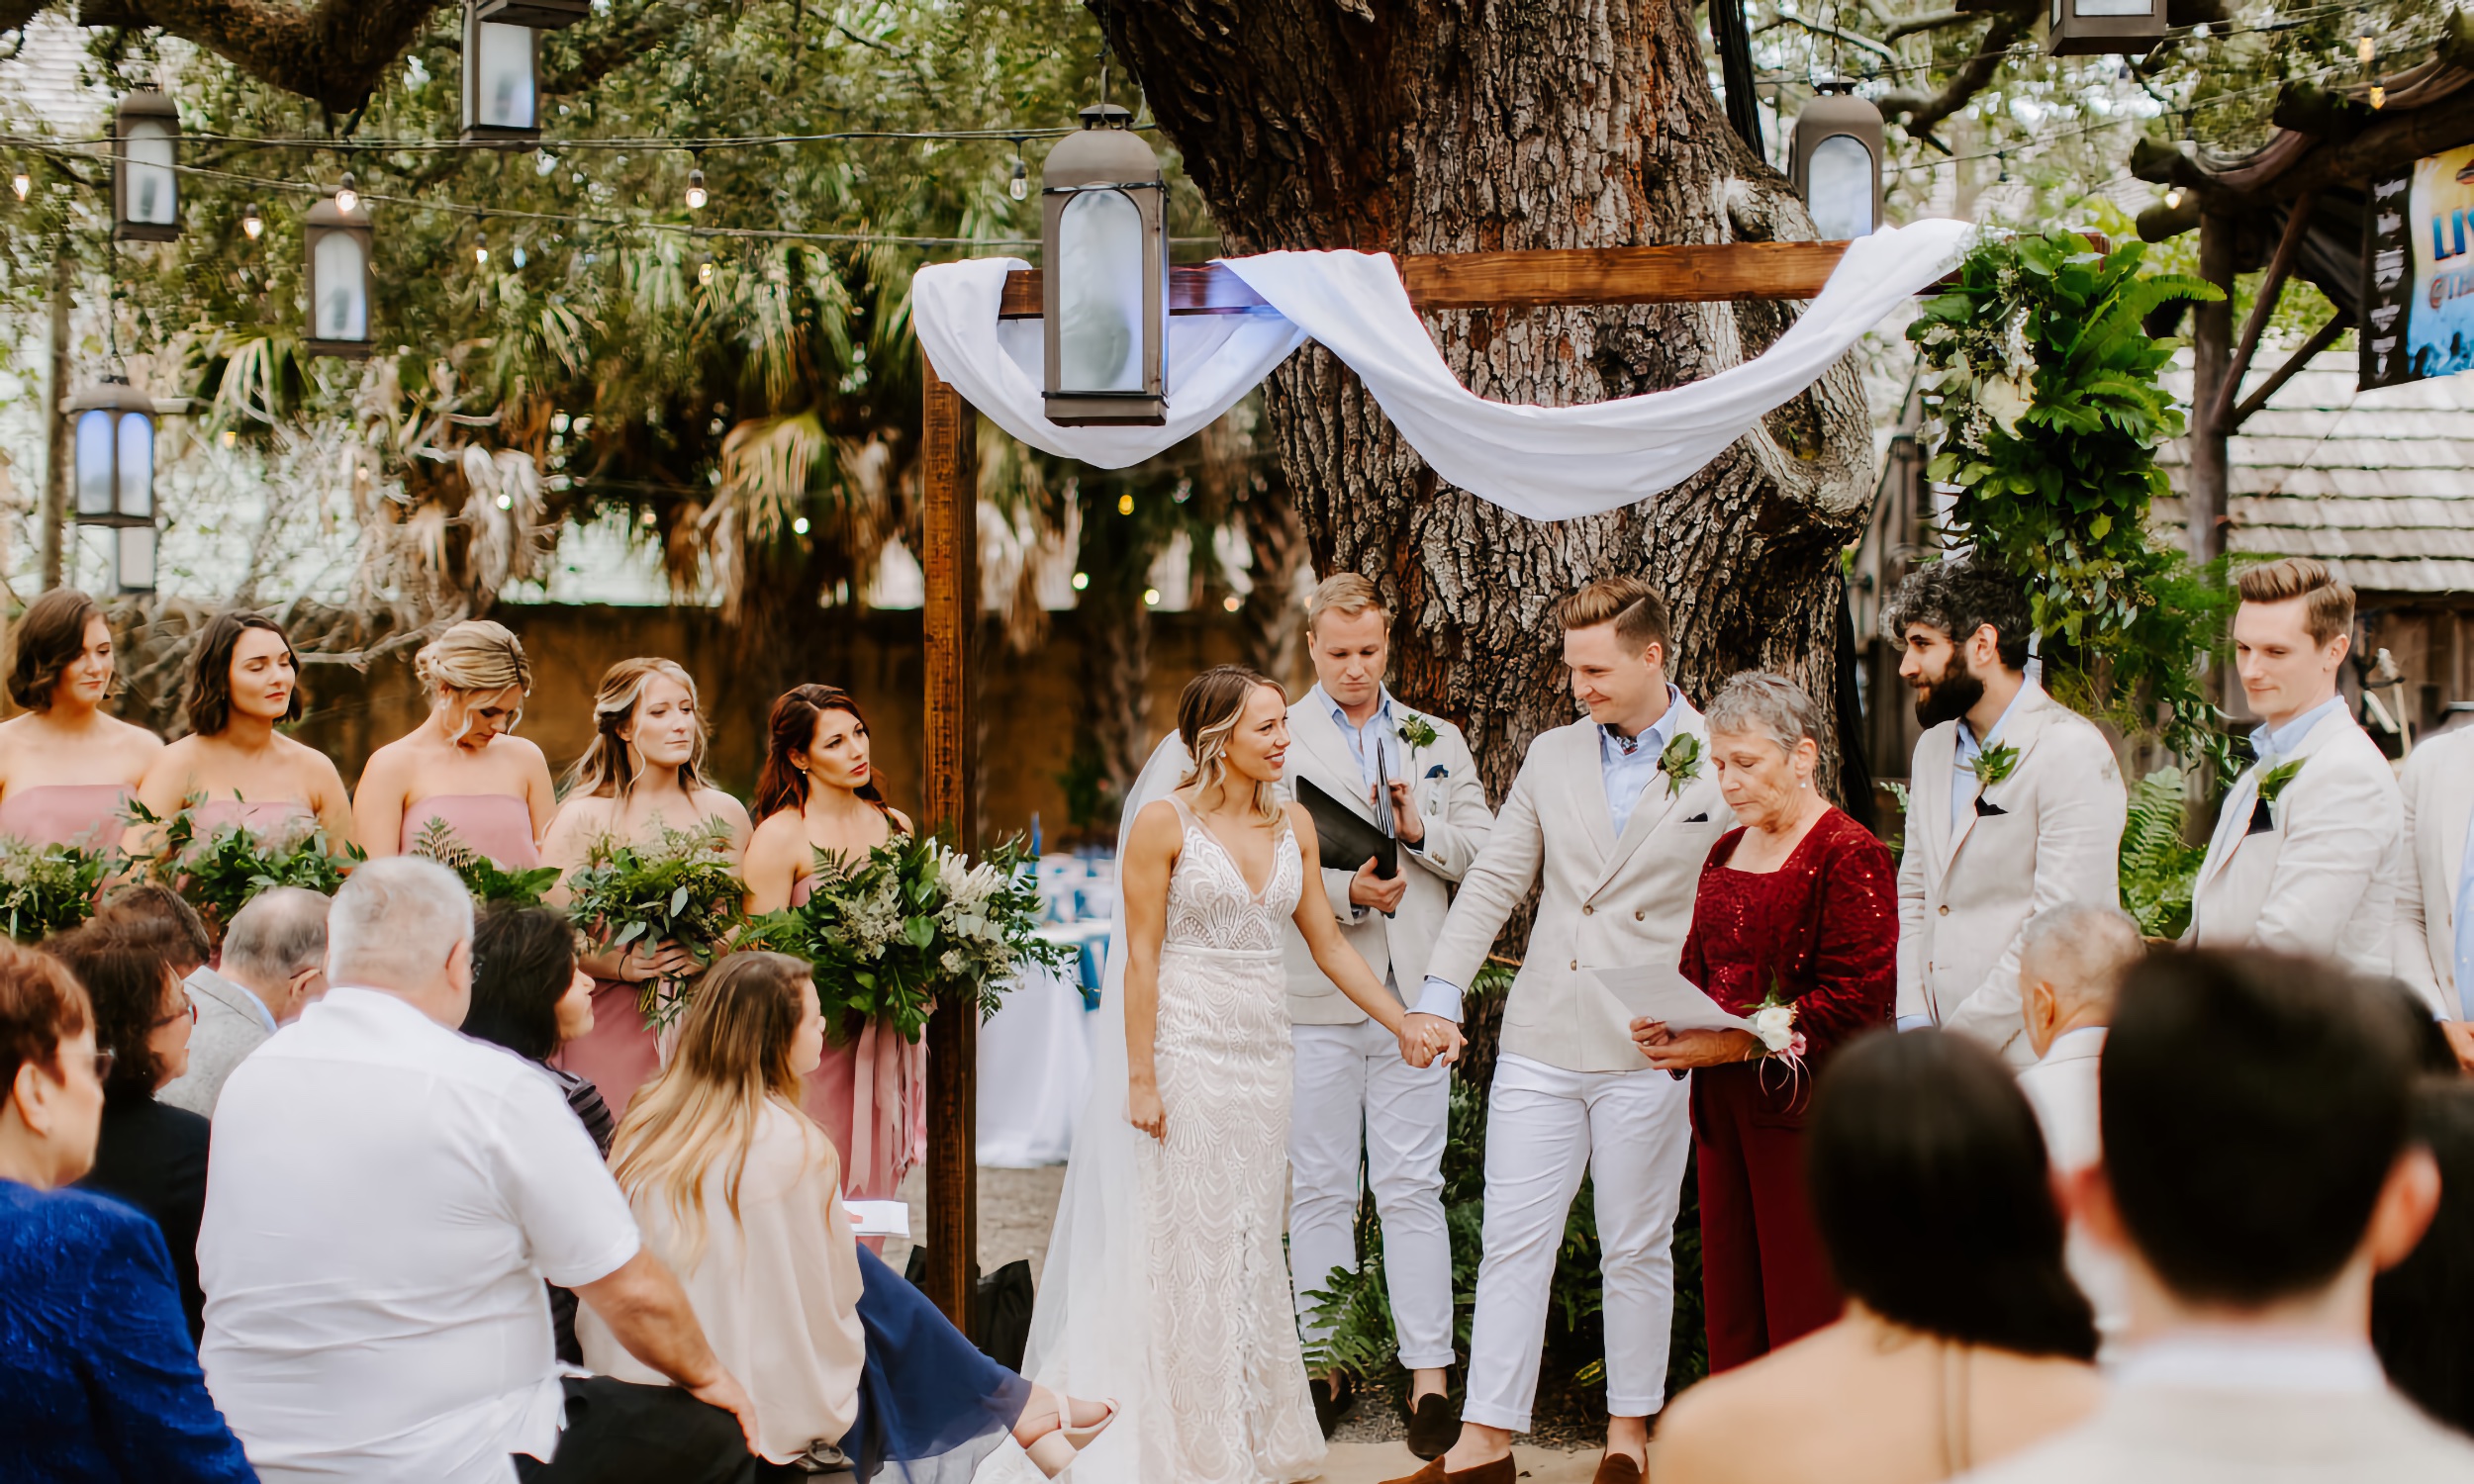 A wedding ceremony taking place at the Colonial Quarter venue